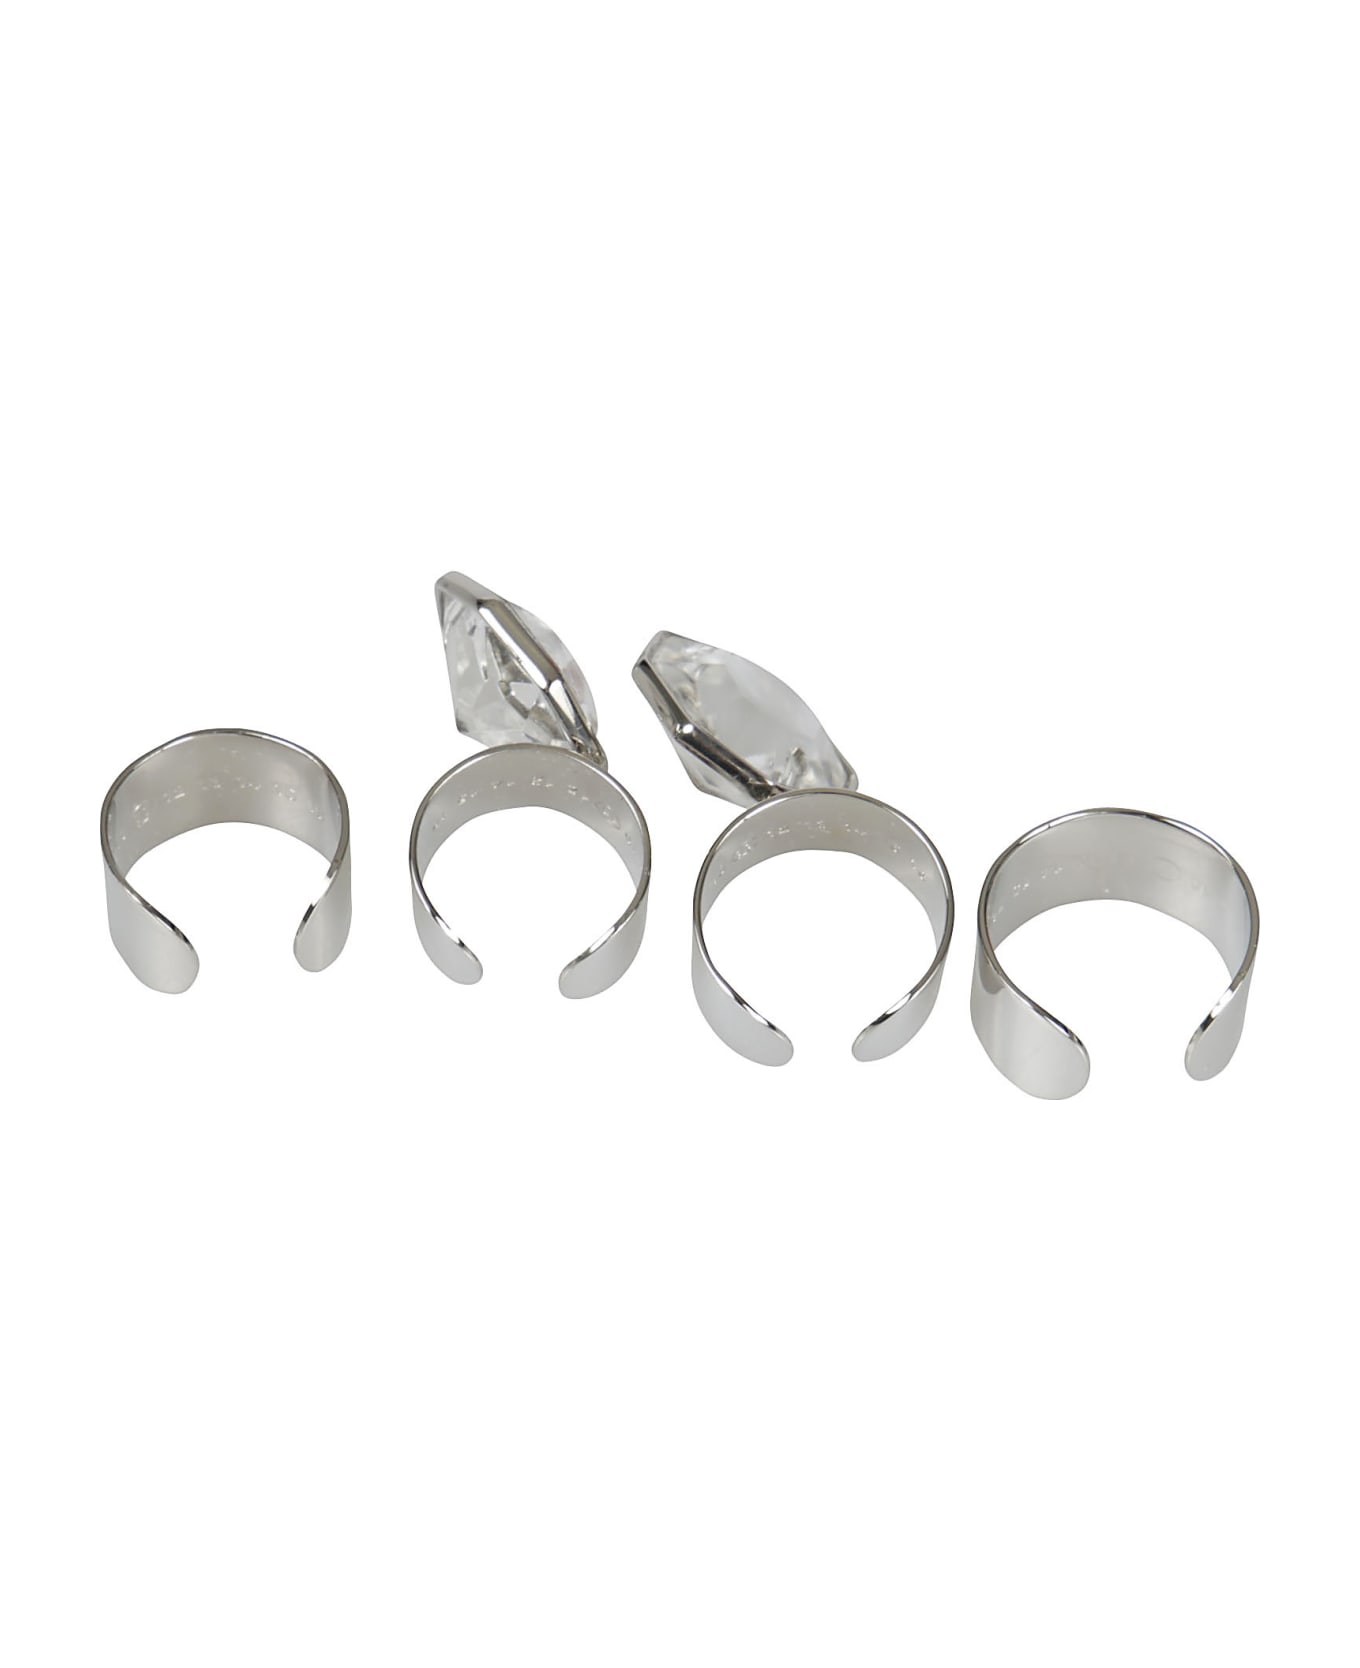 Maison Margiela Assorted Ring - Silver